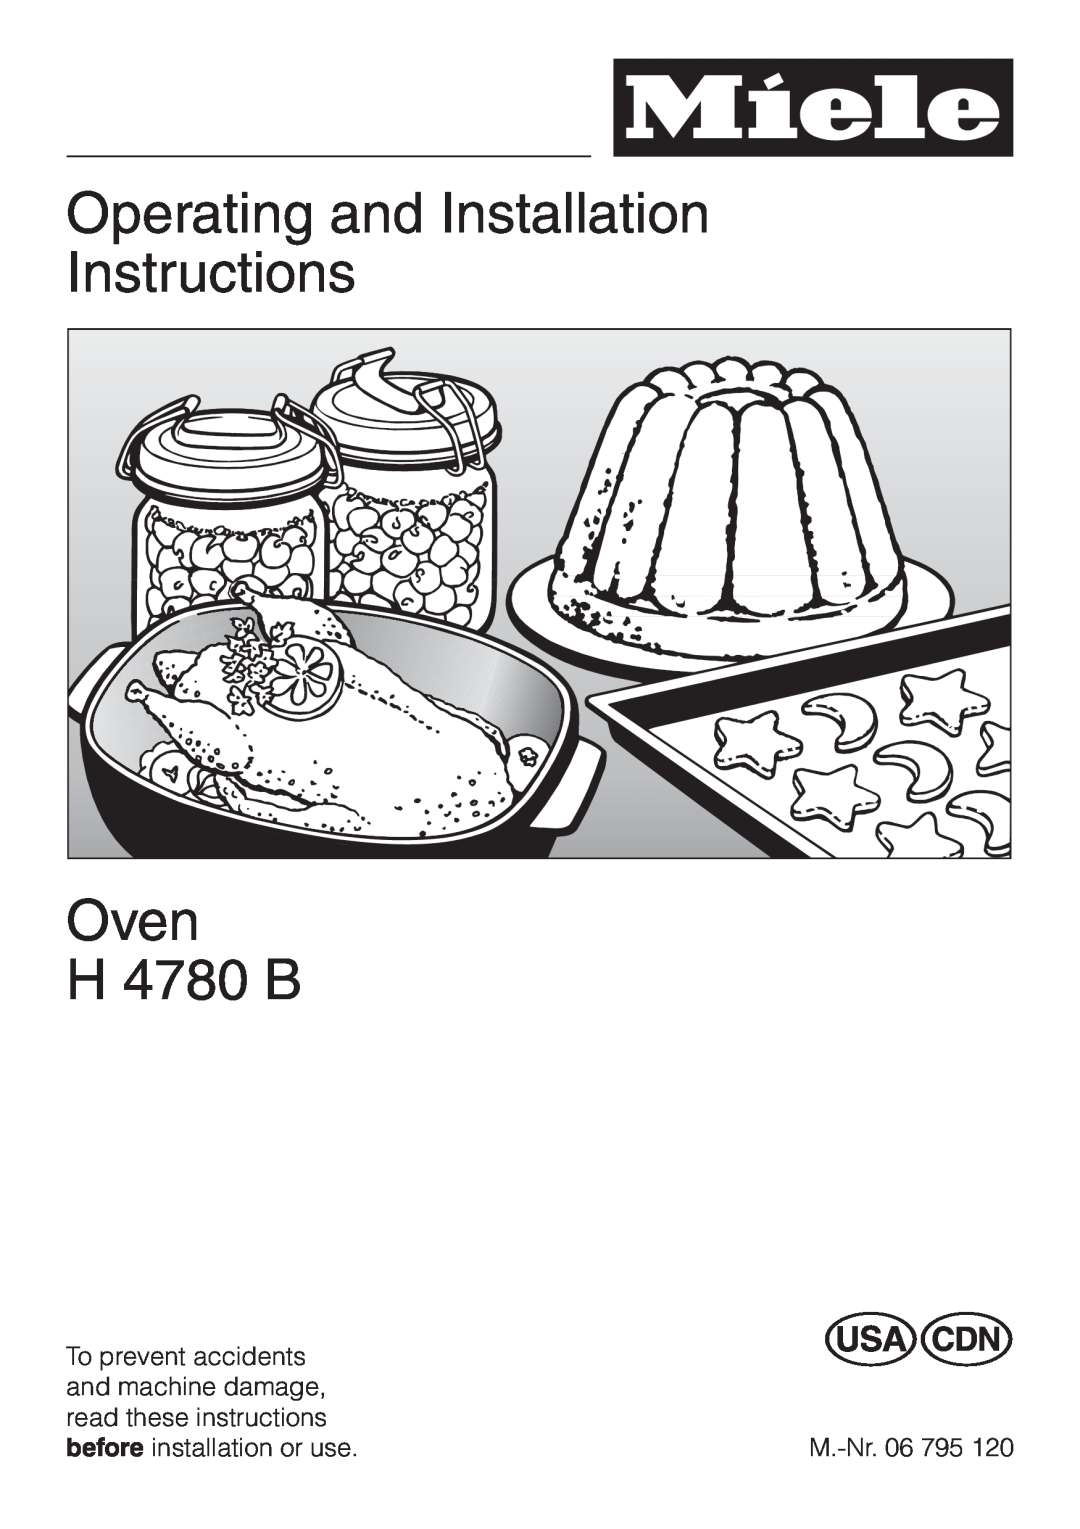 Miele H4780B installation instructions Operating and Installation Instructions, Oven, H 4780 B 